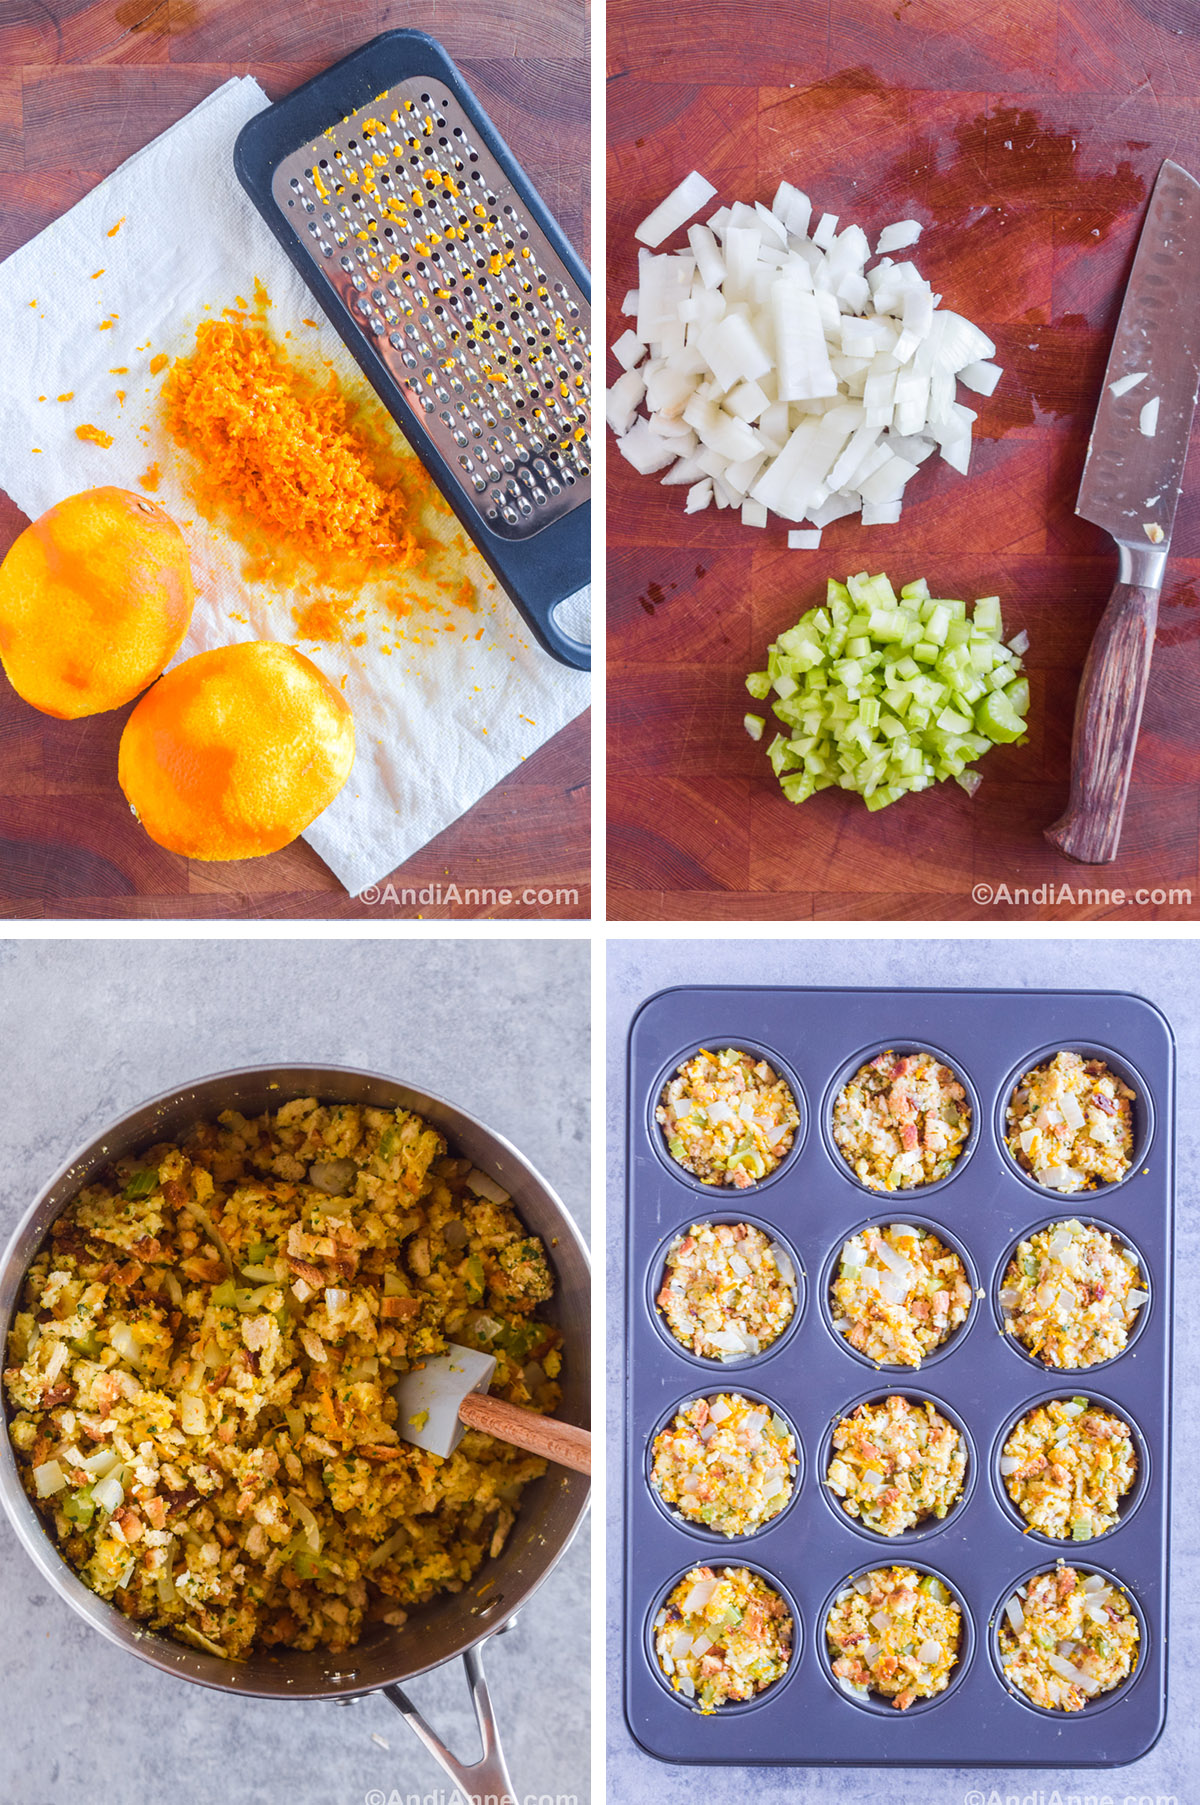 Four images showing steps to make the recipe. First image is grated oranges, orange zest and cheese grater on a paper towel. Second is chopped onion and chopped celery with a knife. Third is cooked stuffing mix in the pot. Fourth is stuffing mixture divided into a muffin pan.